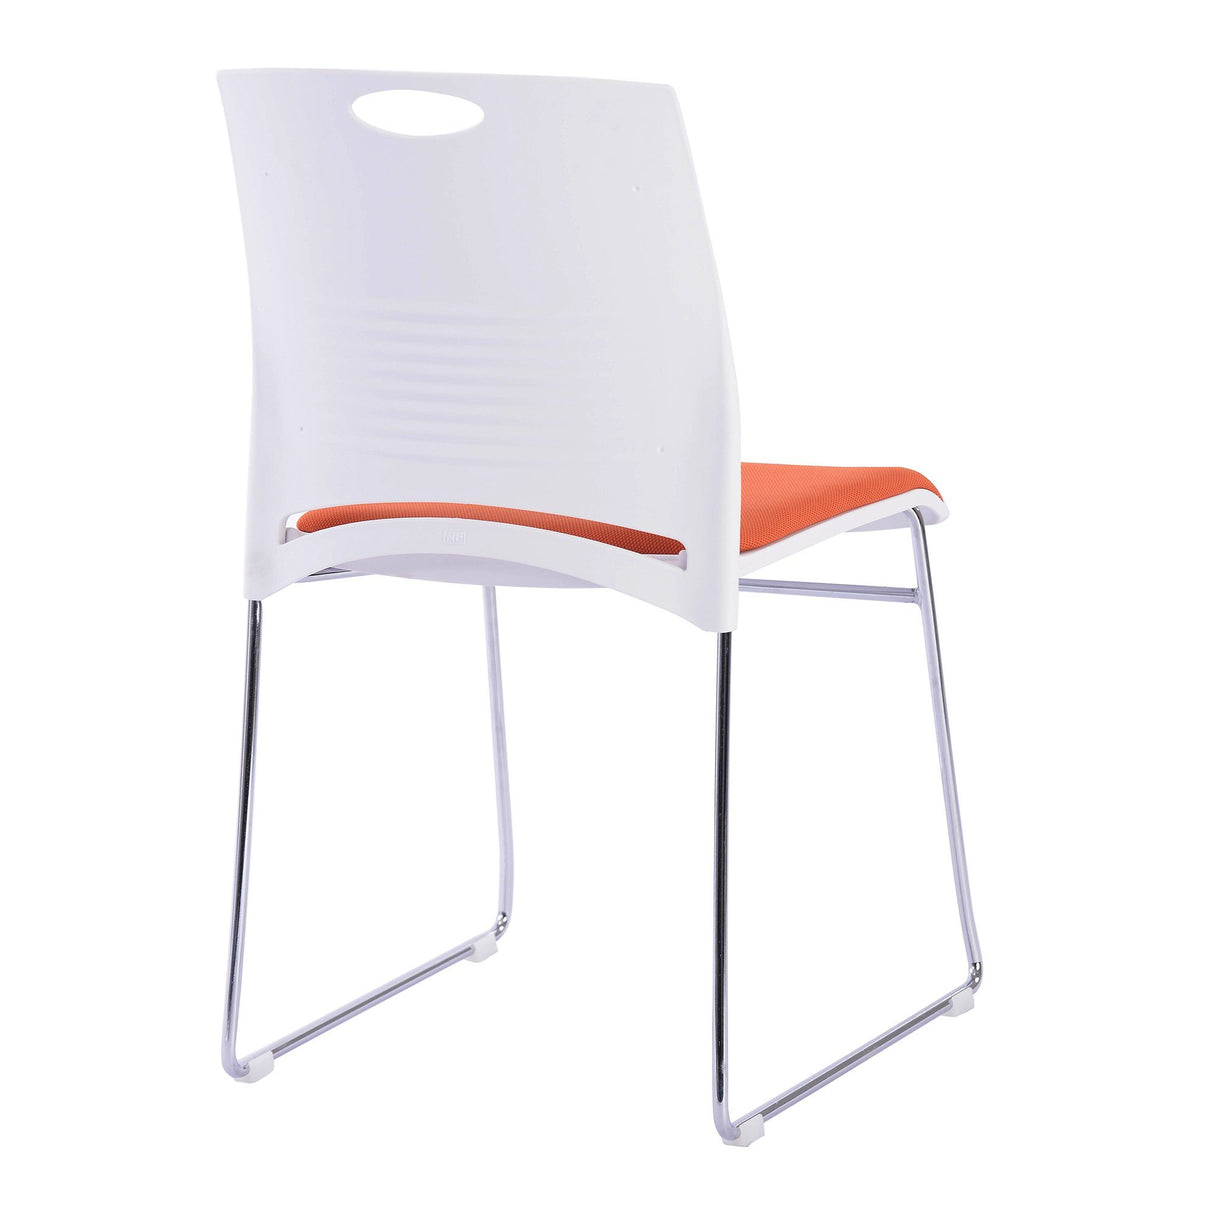 Nautilus Designs Kore Stylish Stackable Chrome Frame Chair with Padded Upholstered Seat, White Shell and Hand Hole in Backrest - 2 per Box -Orange